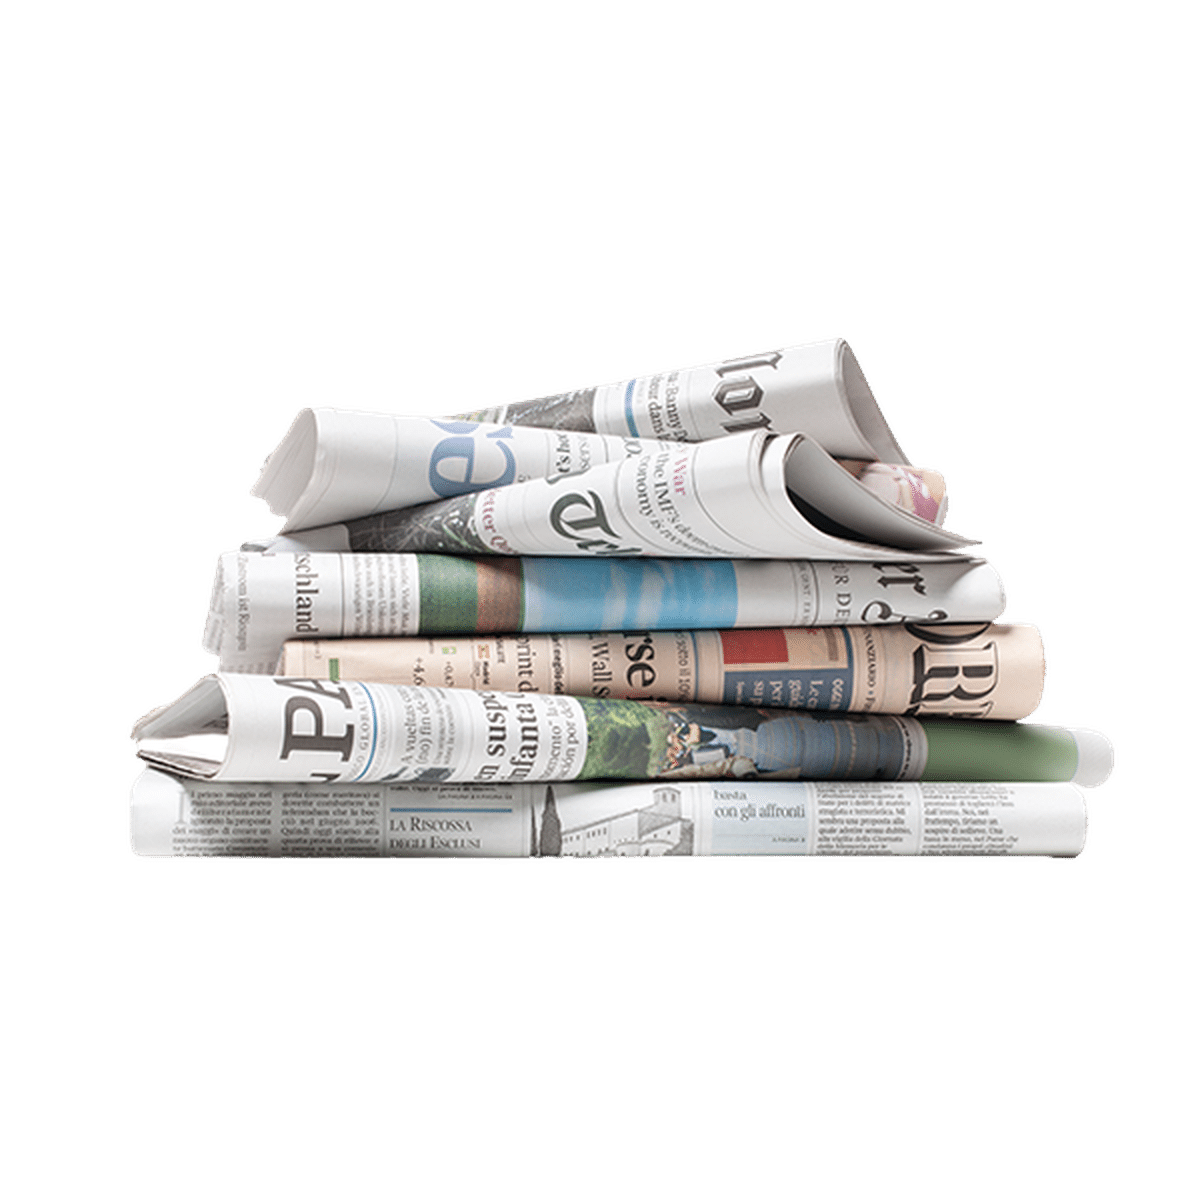 newspapers-products-delivery-or-pickup-near-me-instacart